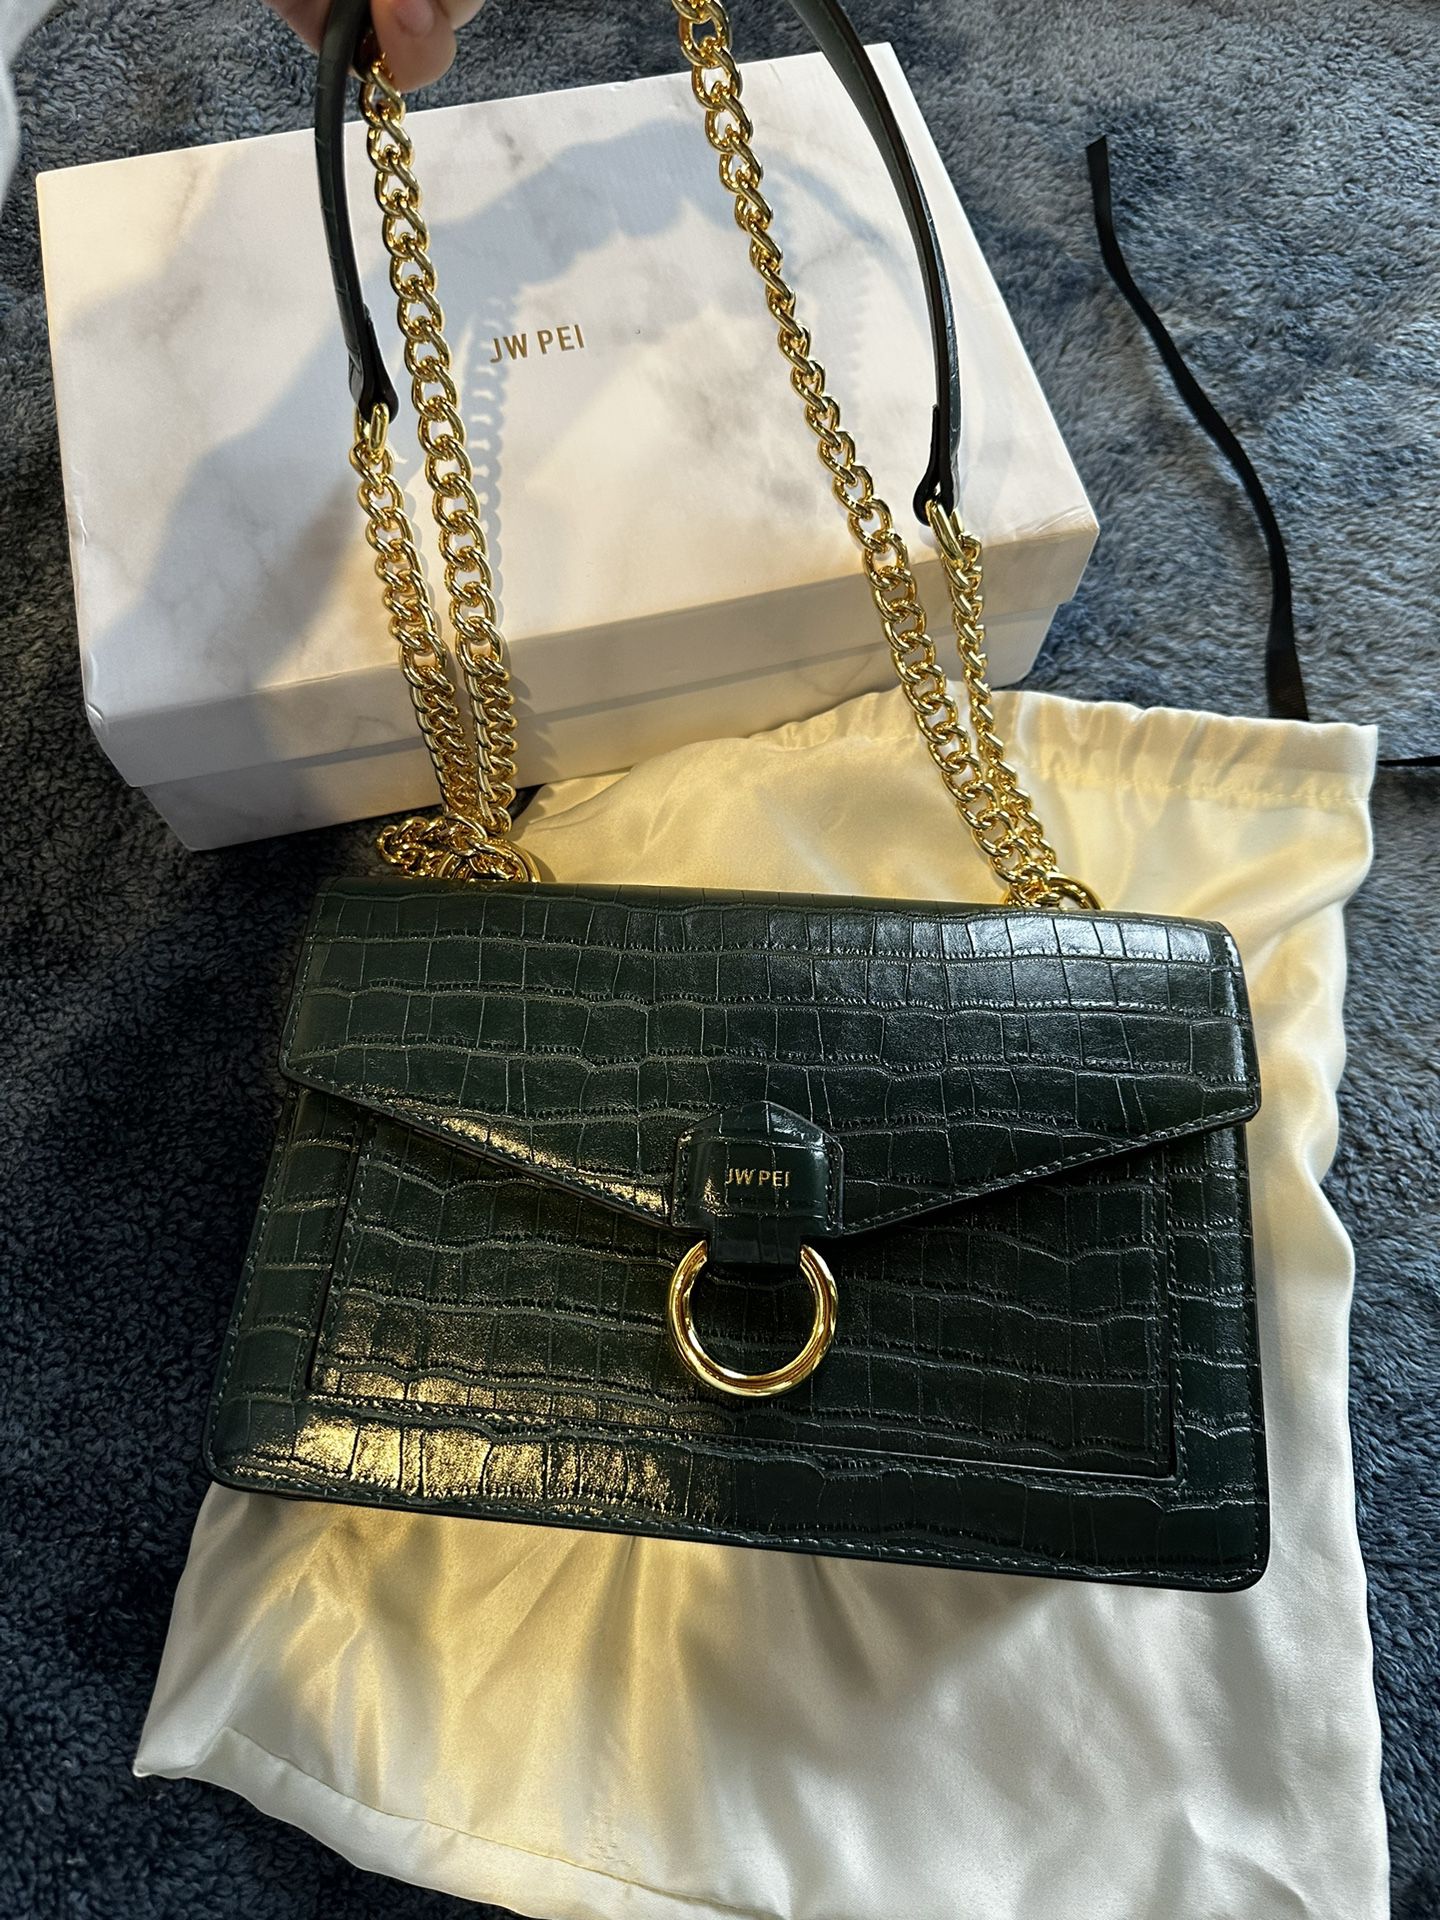 JW PEI Envelope Chain Crossbody for Sale in Northbrook, IL - OfferUp